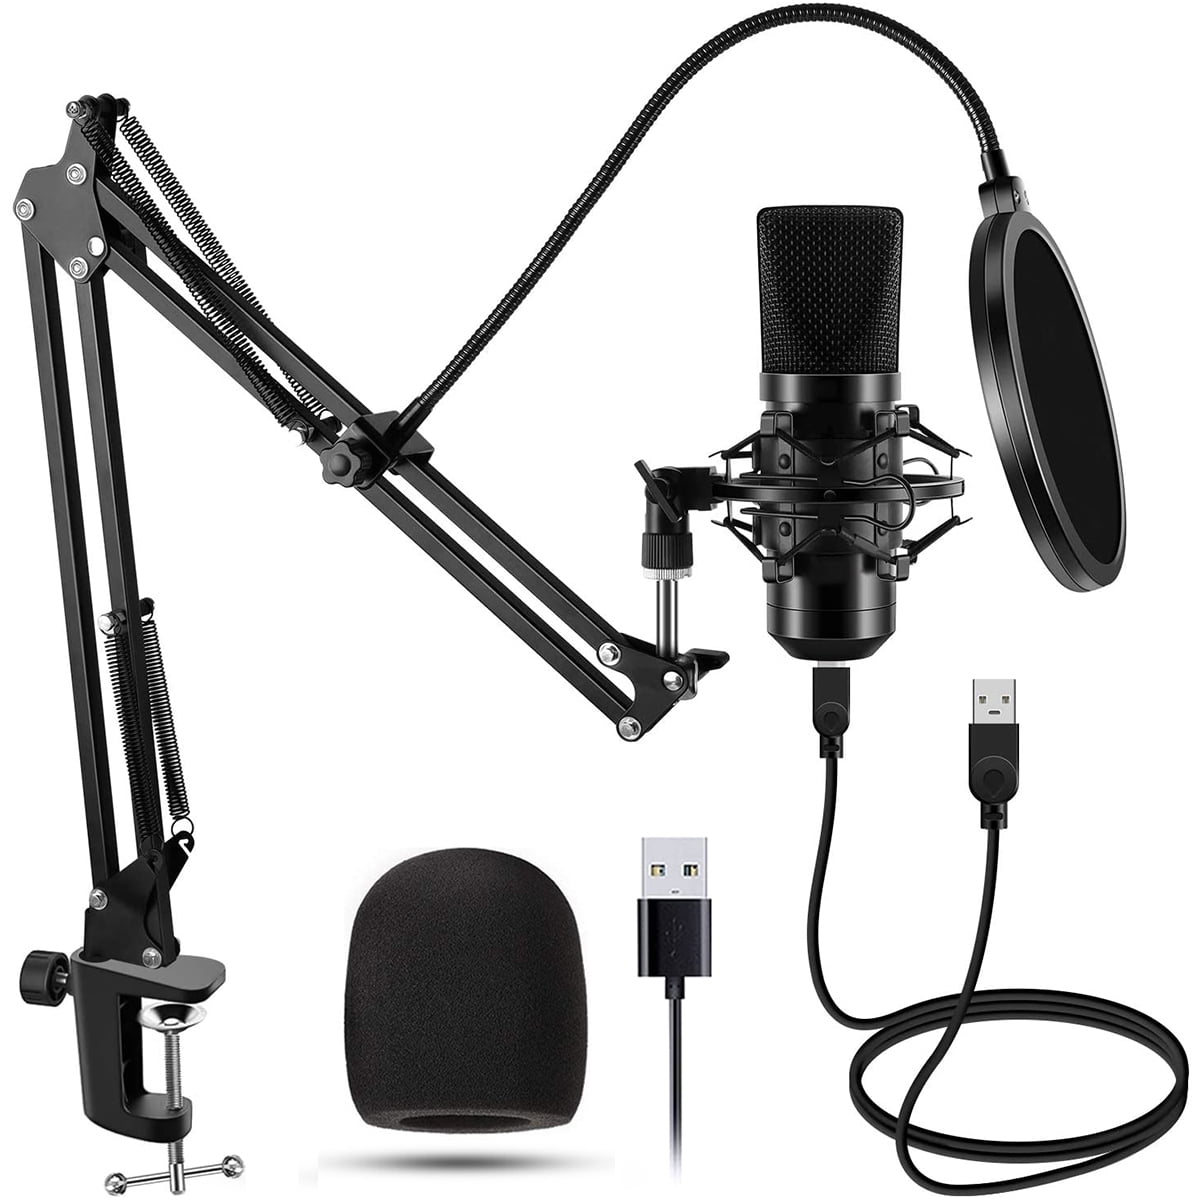 Shock Mount and Pop Filter PC Microphone Bundle for Podcast Karaoke Recording USB Microphone for Computer with Adjustable Mic Suspension Scissor Arm 【Upgrade】 USB Microphone Kit USB Cable 